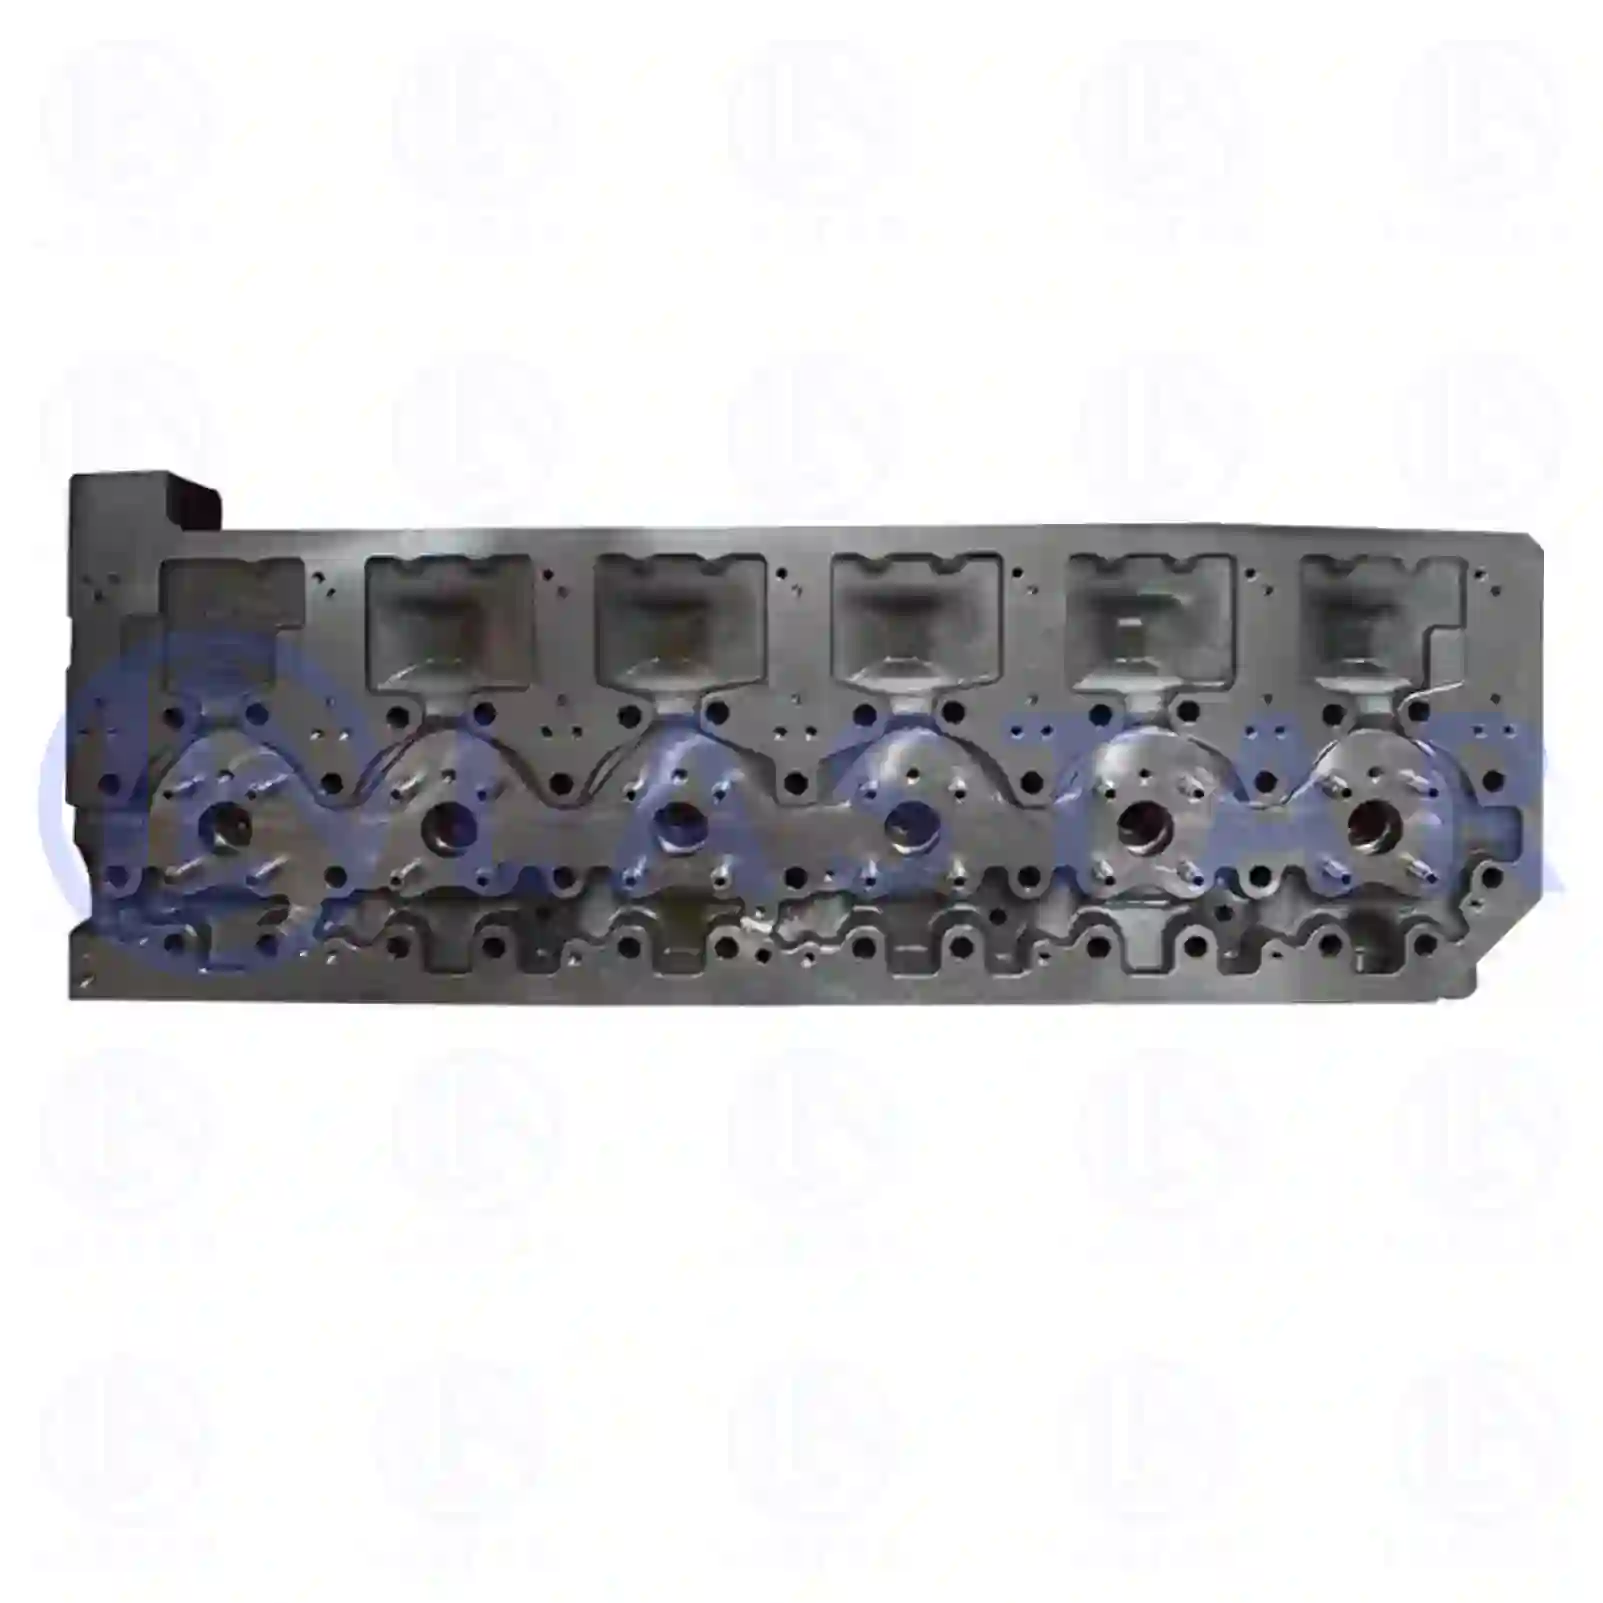 Cylinder head, without valves, 77700029, 20535865, 2056191 ||  77700029 Lastar Spare Part | Truck Spare Parts, Auotomotive Spare Parts Cylinder head, without valves, 77700029, 20535865, 2056191 ||  77700029 Lastar Spare Part | Truck Spare Parts, Auotomotive Spare Parts